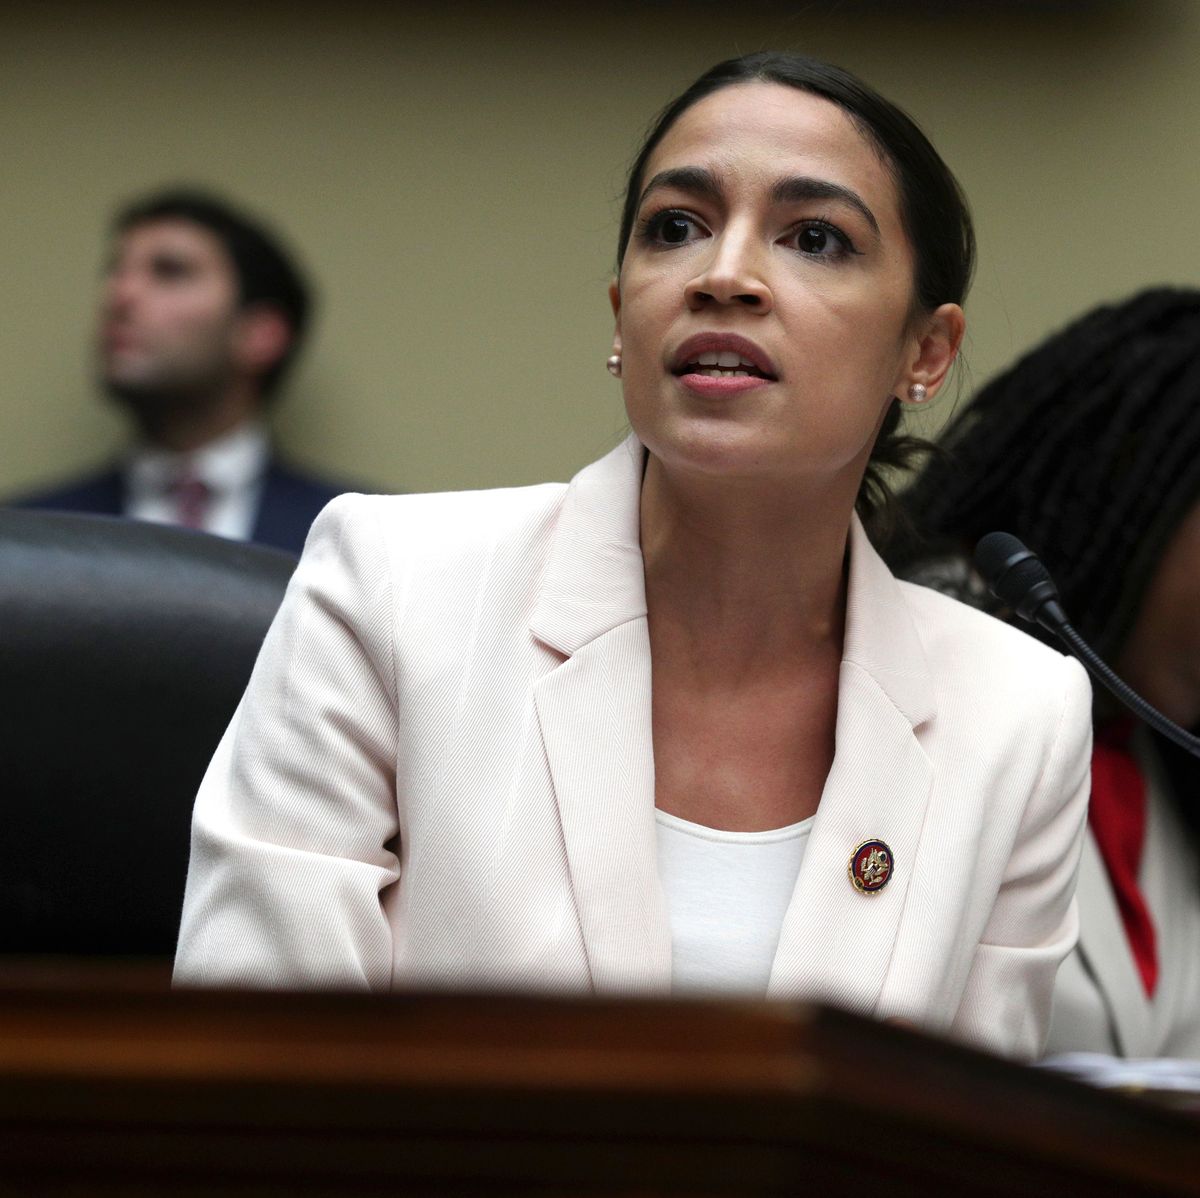 AOC Says She Almost Died During Capitol Riot in Instagram Video